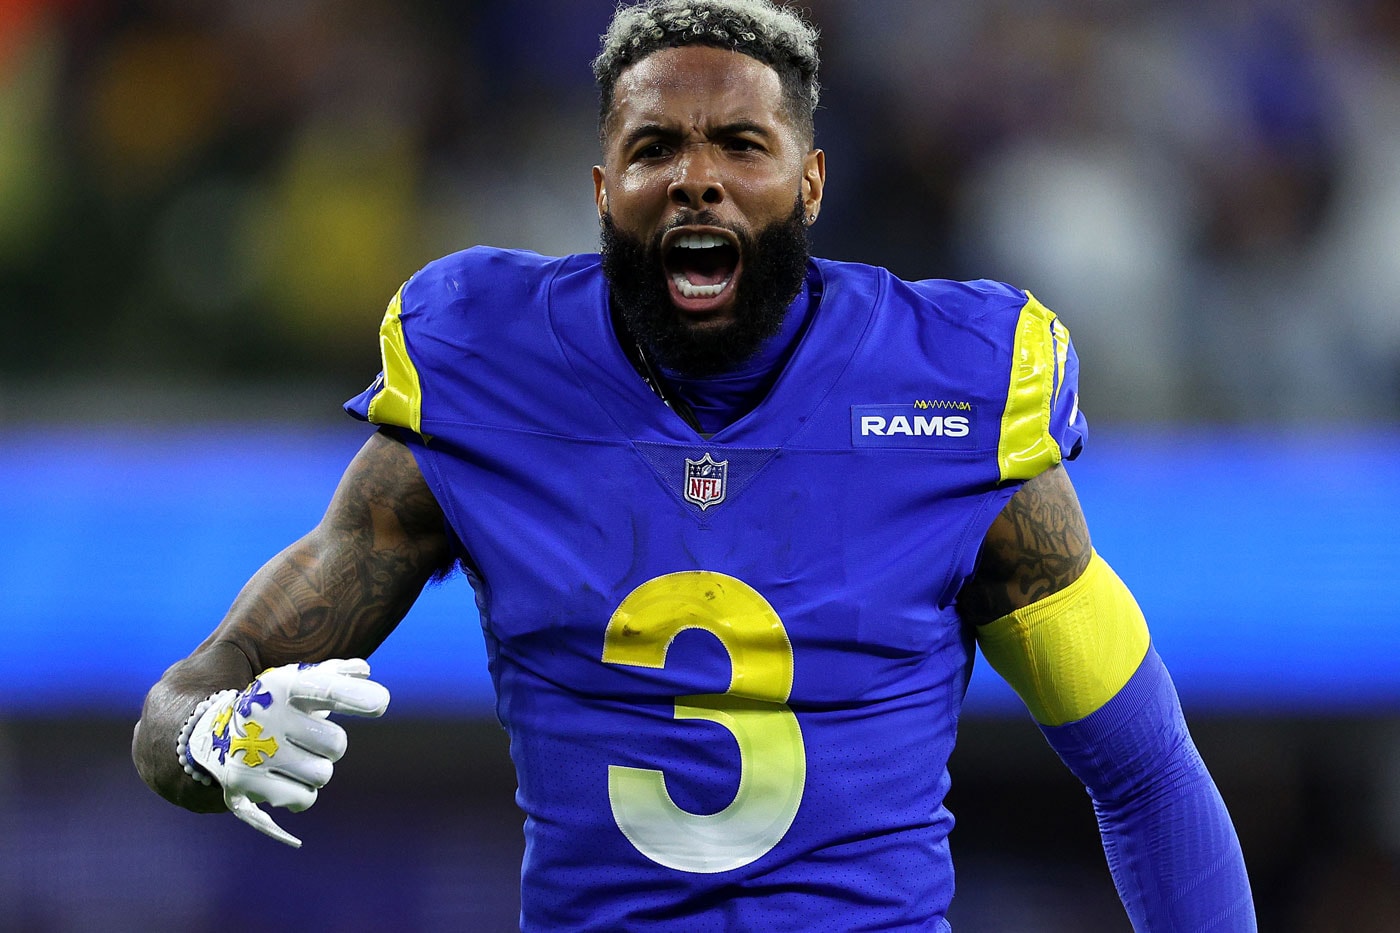 Odell Beckham Jr. Suffers Major Salary Loss After Bitcoin Decline los angeles ram nfl american football wr wide receiver tampa bay buccaneers 